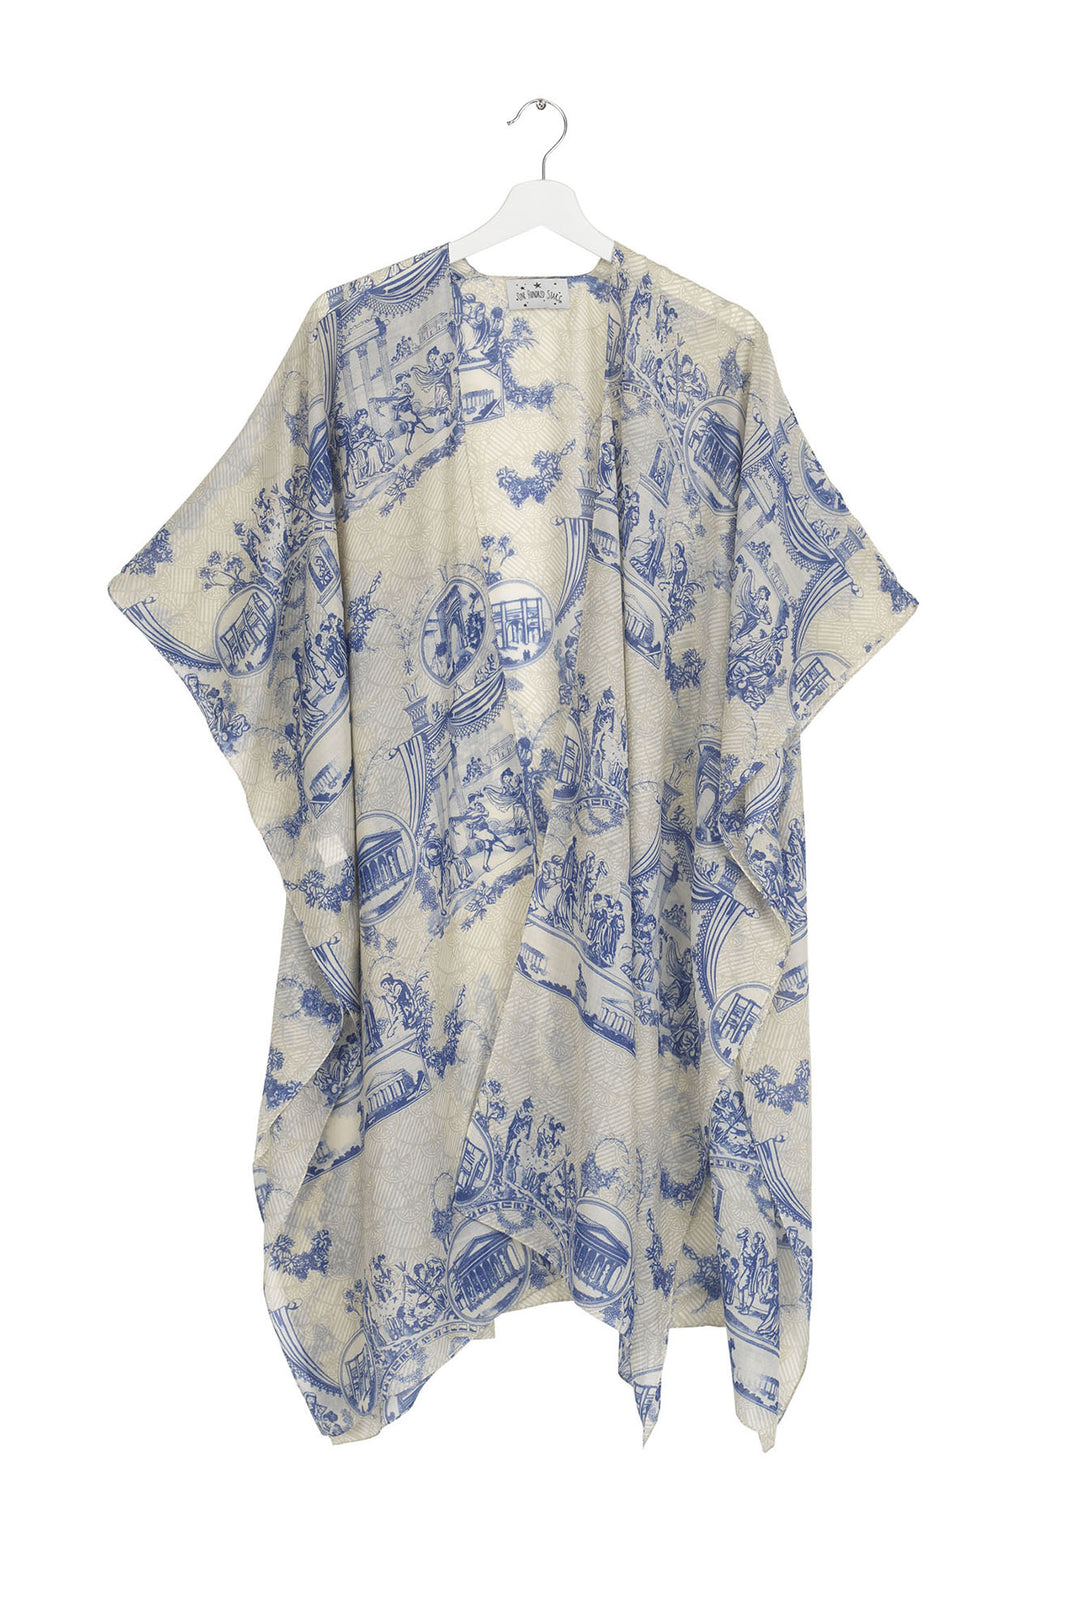 Toile De Jouy blue and white throwover by One Hundred Stars